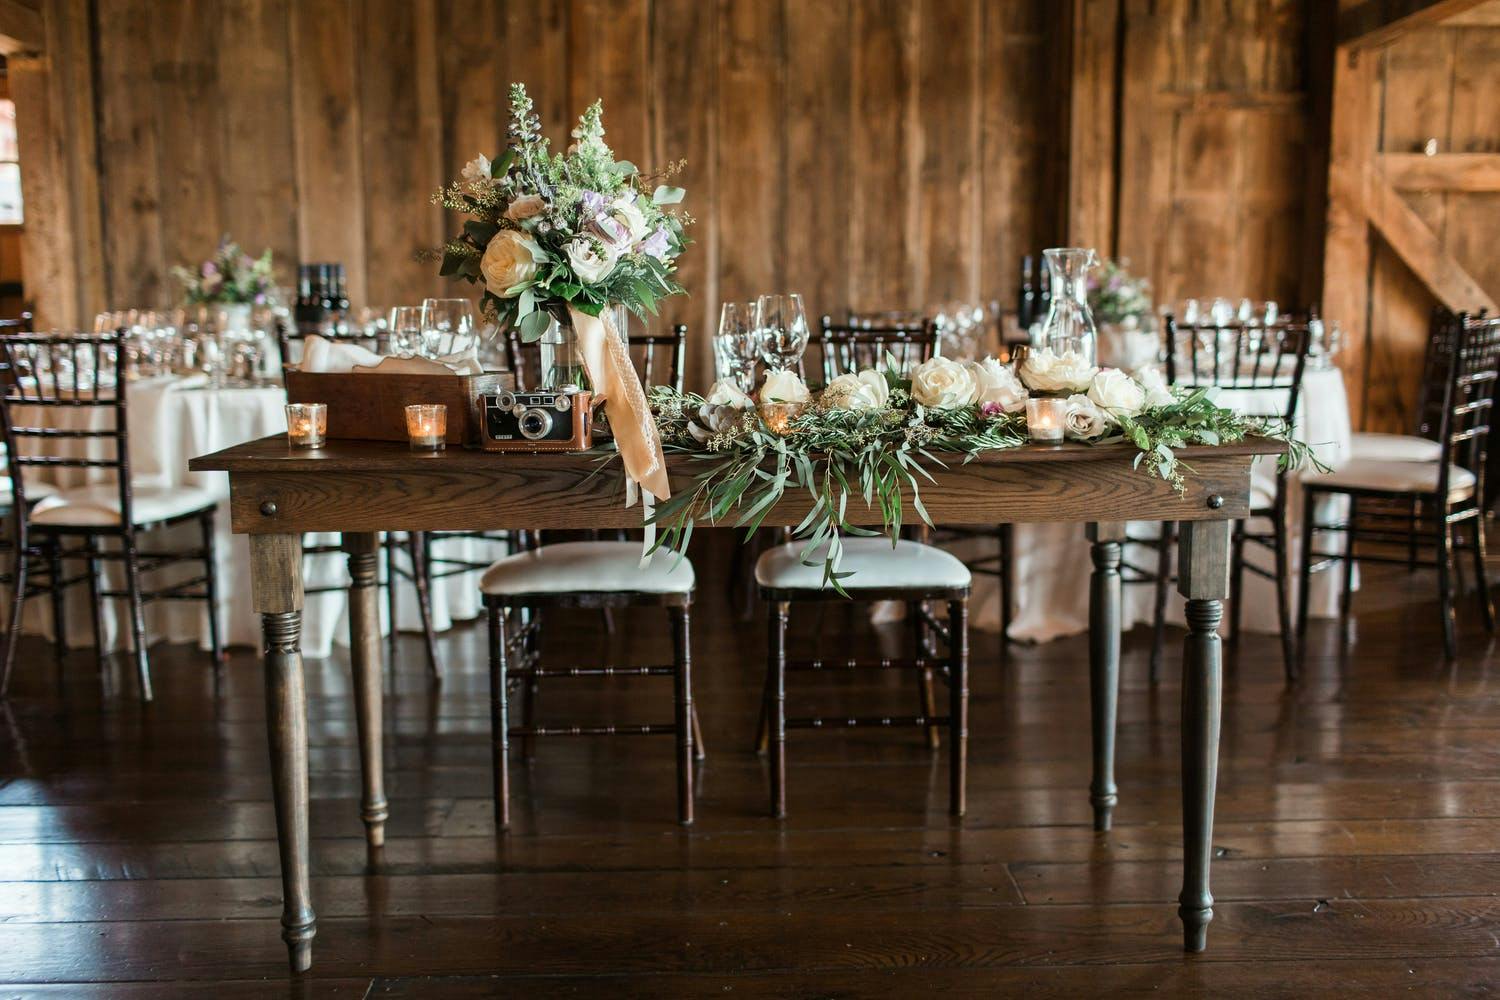 Rustic Wedding Centerpieces With Greenery, Peach Ribbon, and a Vintage Camera | PartySlate